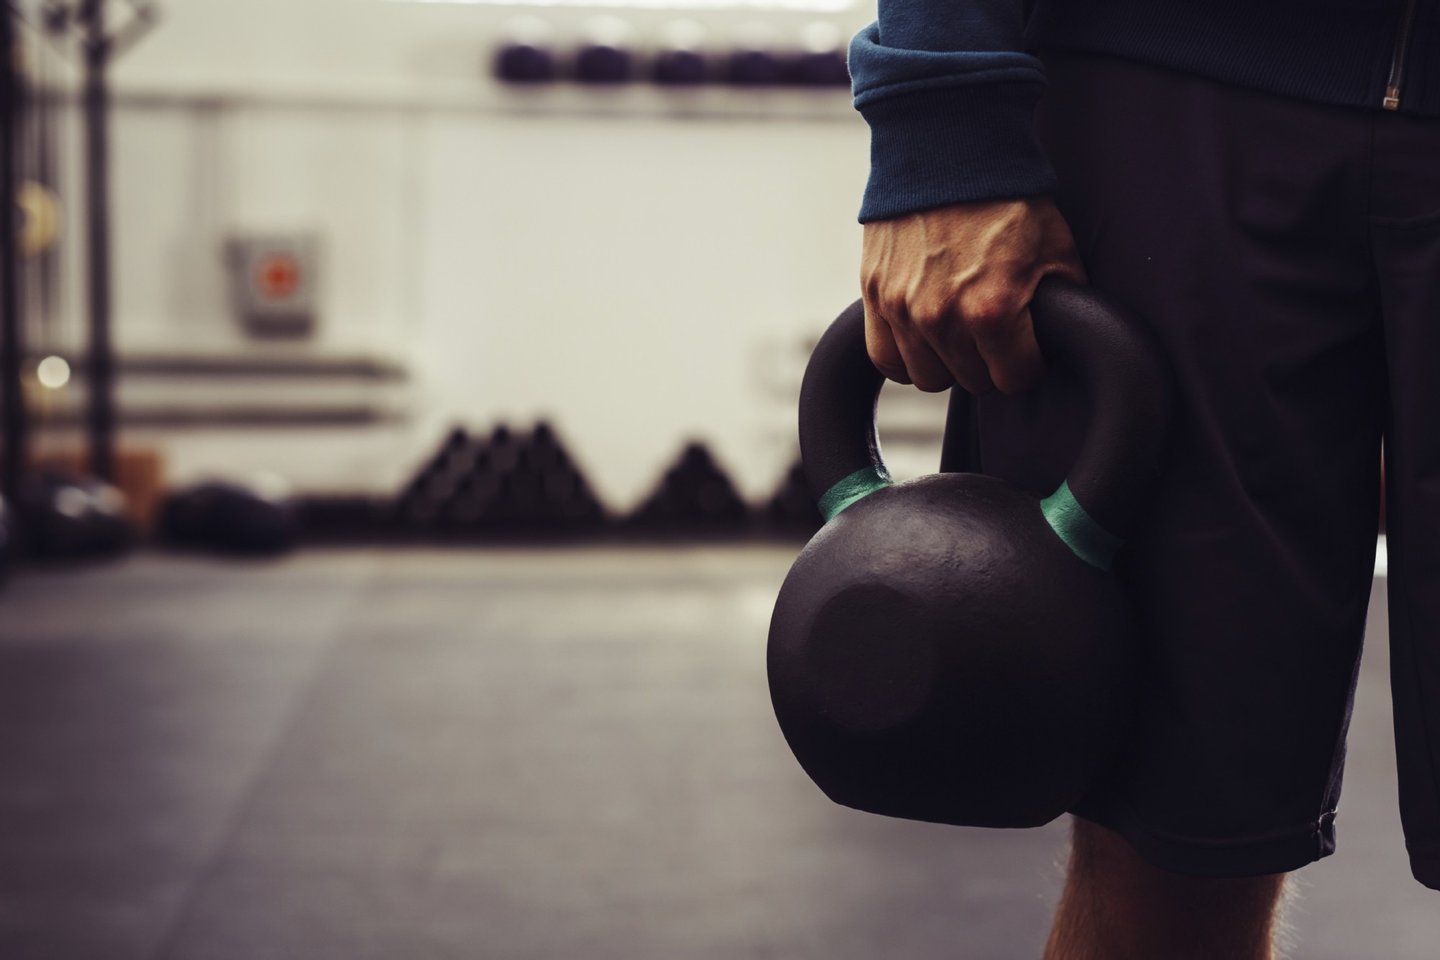 Exercise, Recreational Pursuit, activity, caucasian, closeup, cross, cross training, crossfit, dark, fit, fitness, grab, gym, holding, indoors, kettlebell, male, man, one person, people, sport, sport activity, strong, training, weight, weightlifting, workout, 